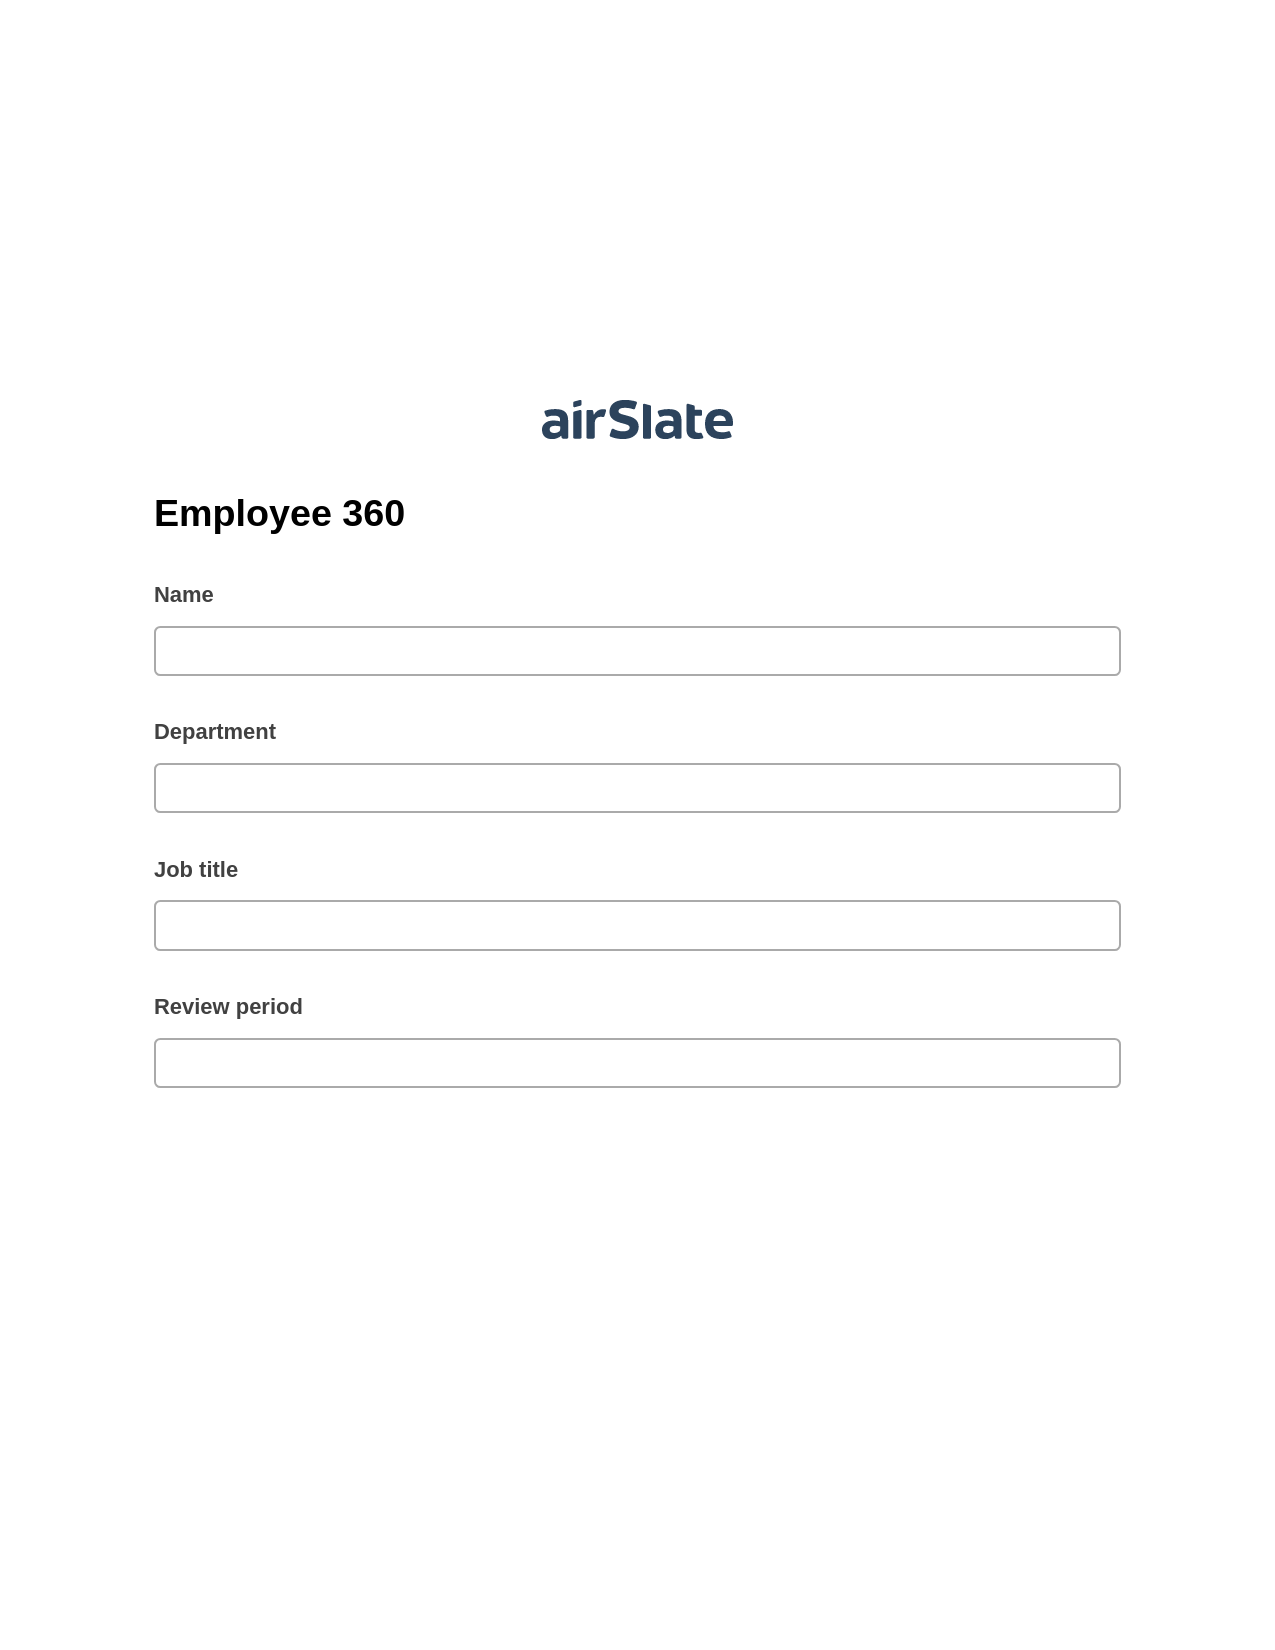 Employee 360 Prefill from NetSuite records, Create MS Dynamics 365 Records Bot, Export to WebMerge Bot